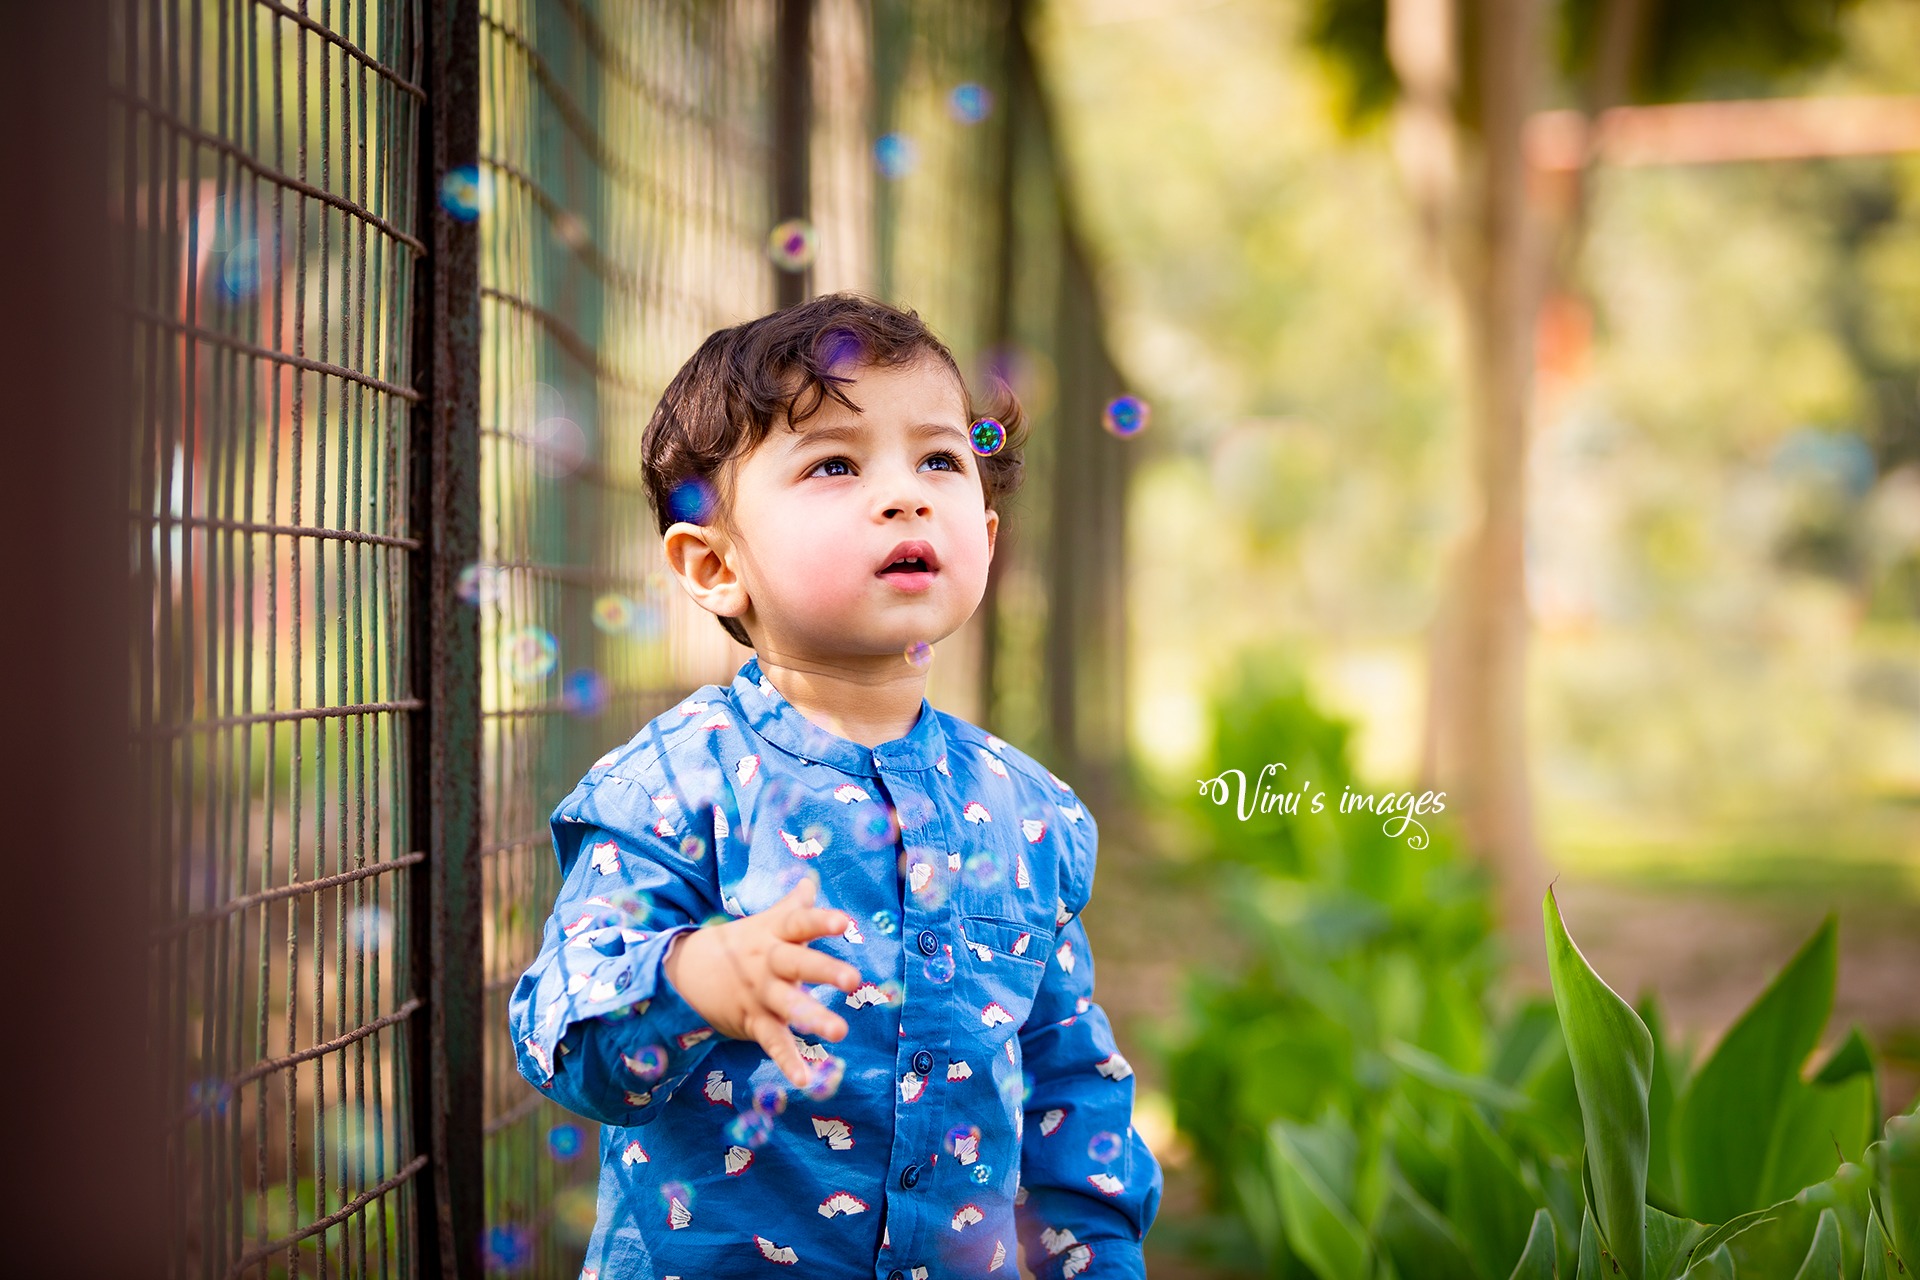 Kids Photography Tips | How To Take Better Children Pictures | Bidun Art